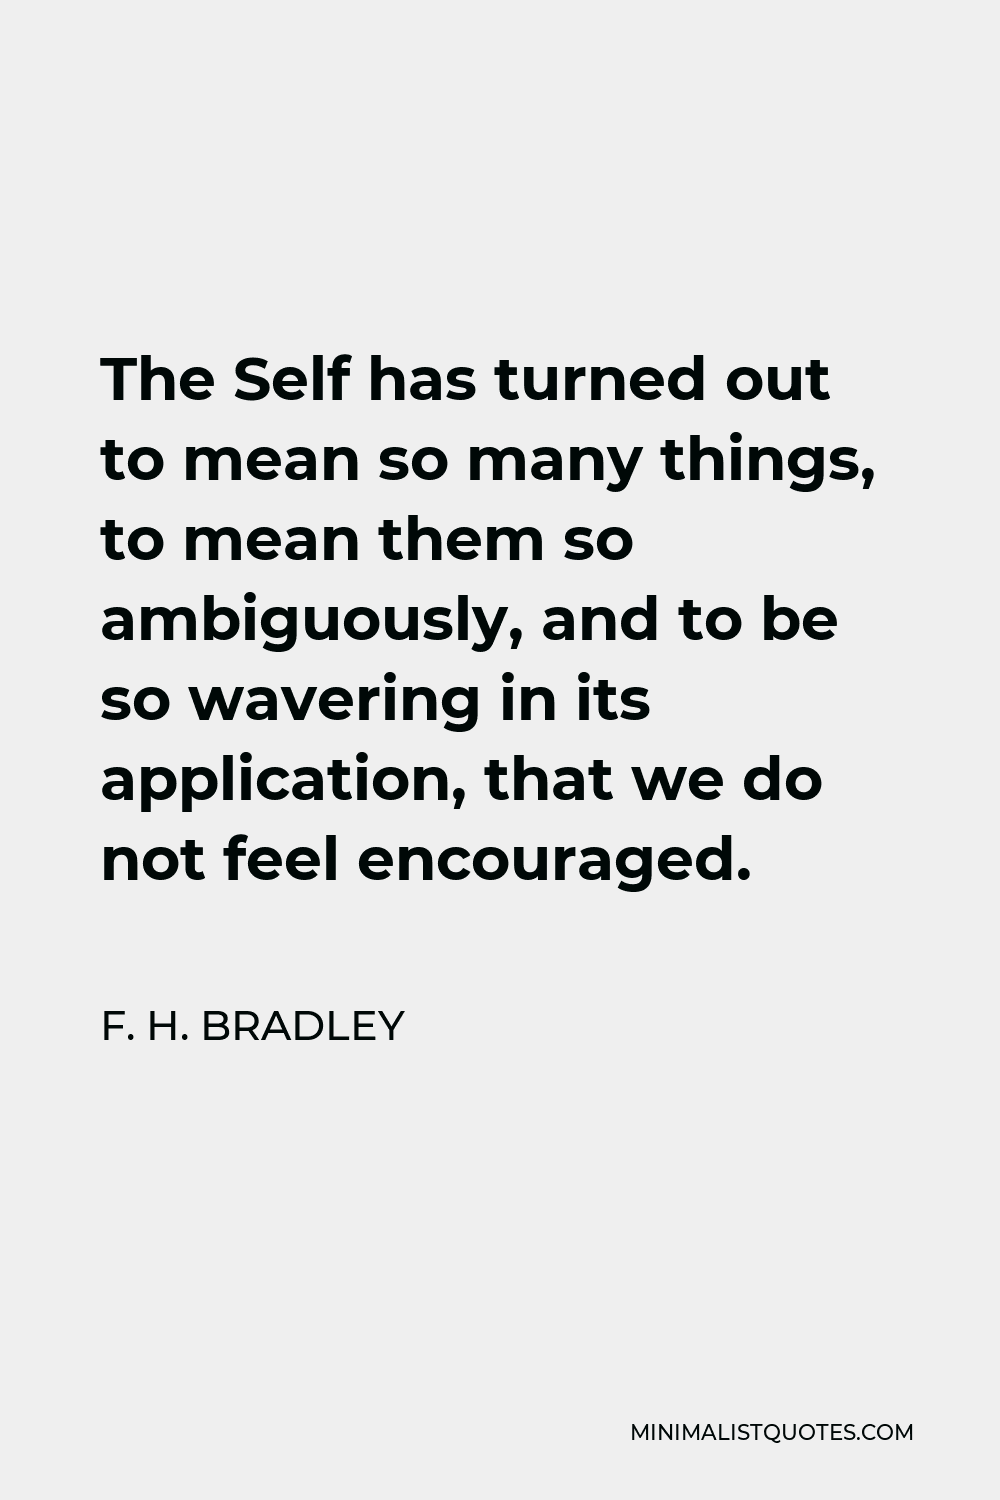 F. H. Bradley Quote - The Self has turned out to mean so many things, to mean them so ambiguously, and to be so wavering in its application, that we do not feel encouraged.